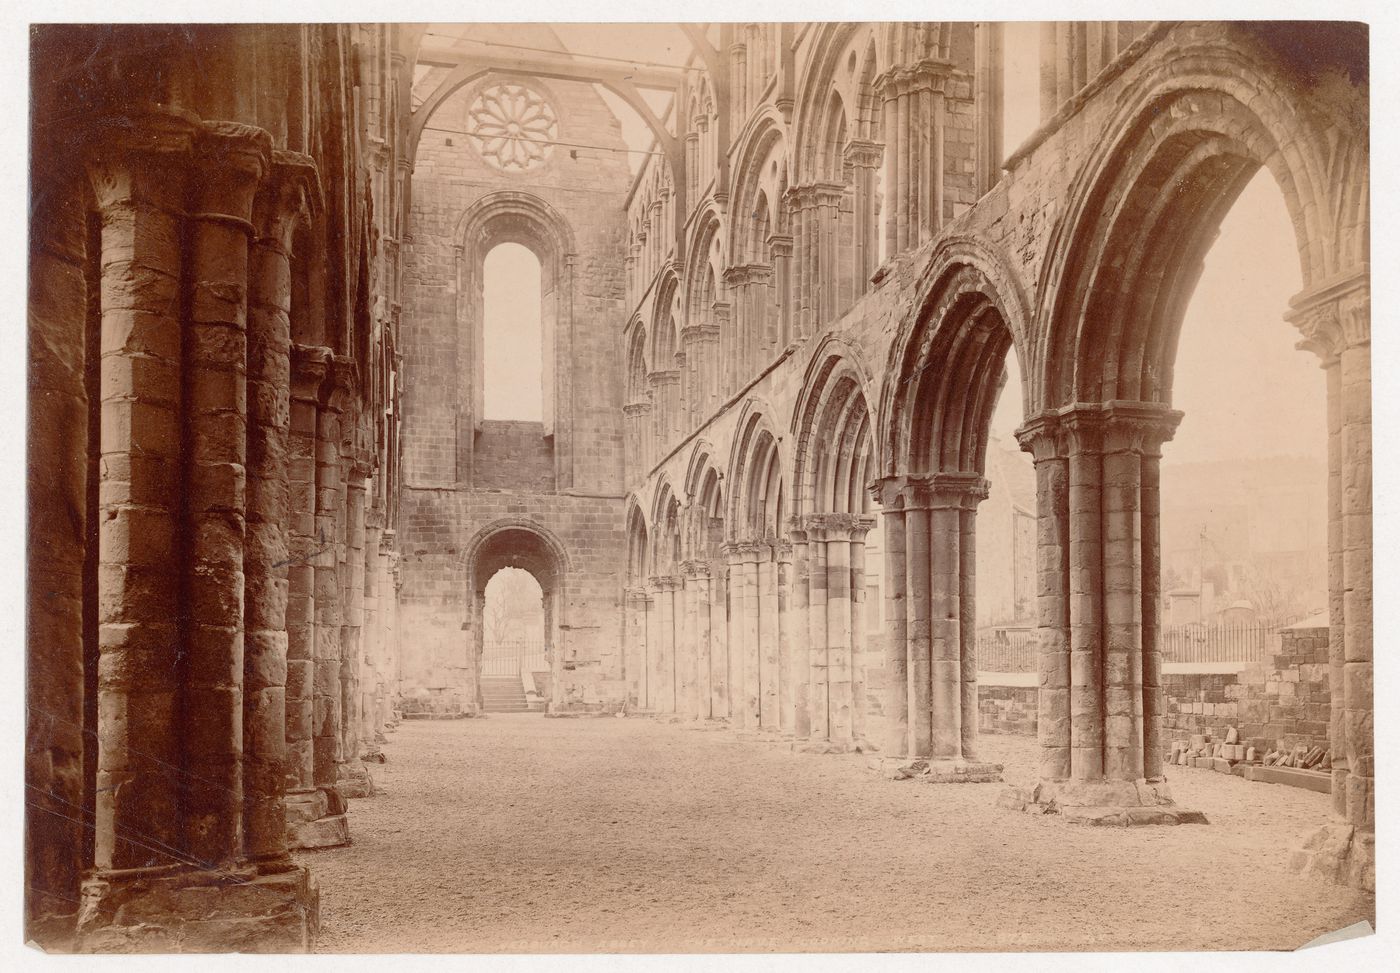 Interior view looking down the nave of the ruins of Jedburgh Abbey, Jedburgh, Roxburghshire, Scotland